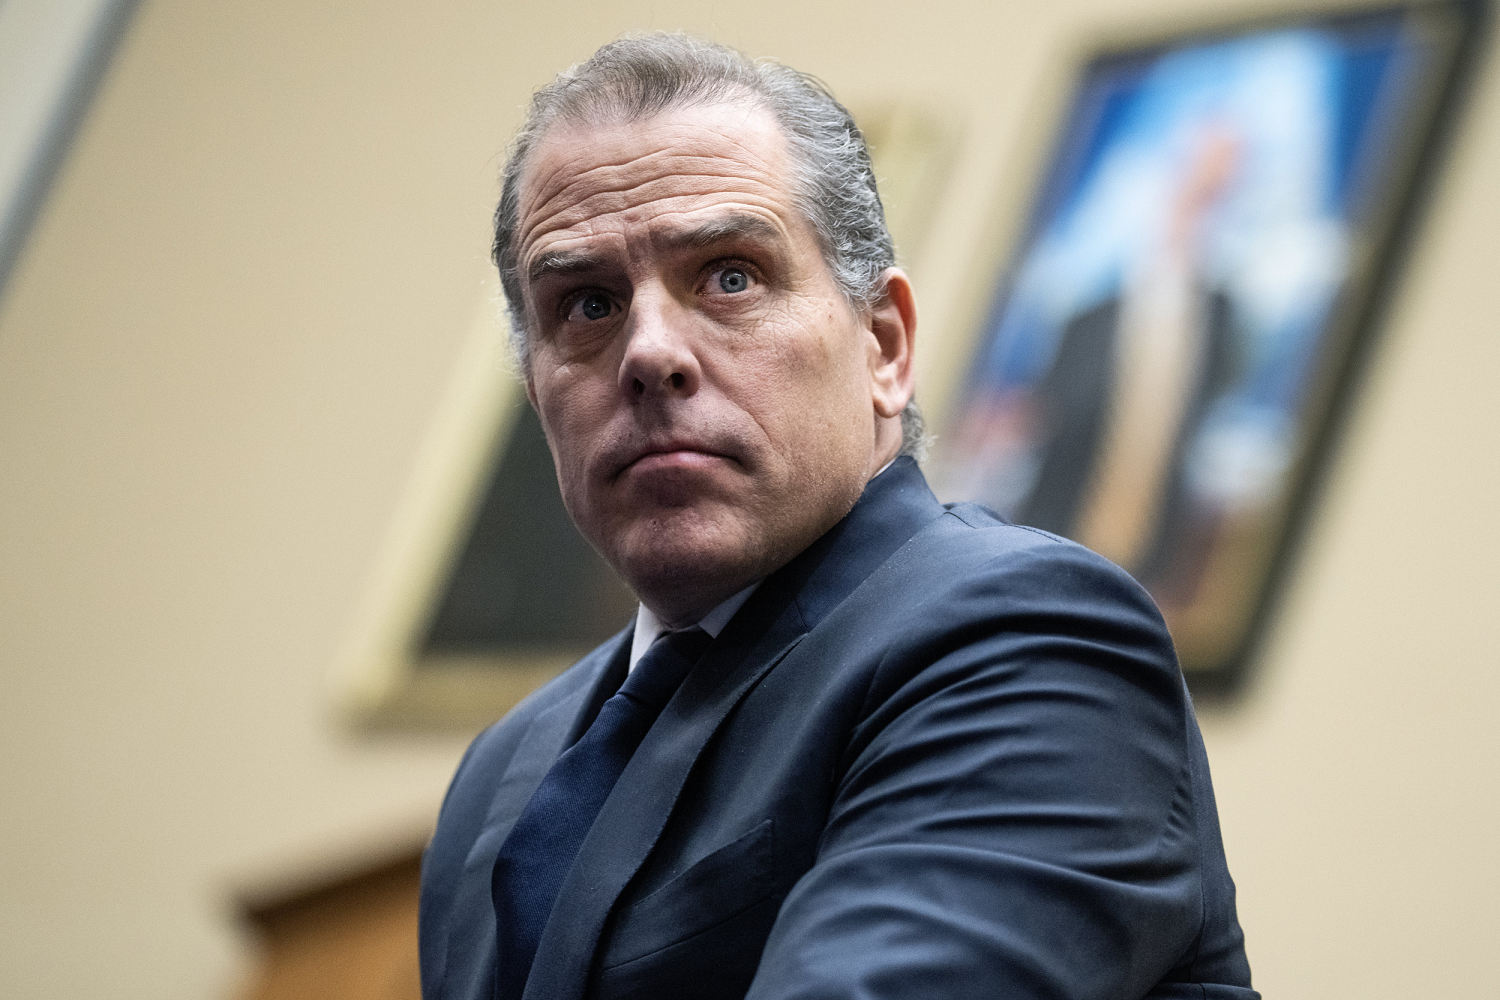 Judge rejects Hunter Biden's effort to delay June 3 trial date for gun charges